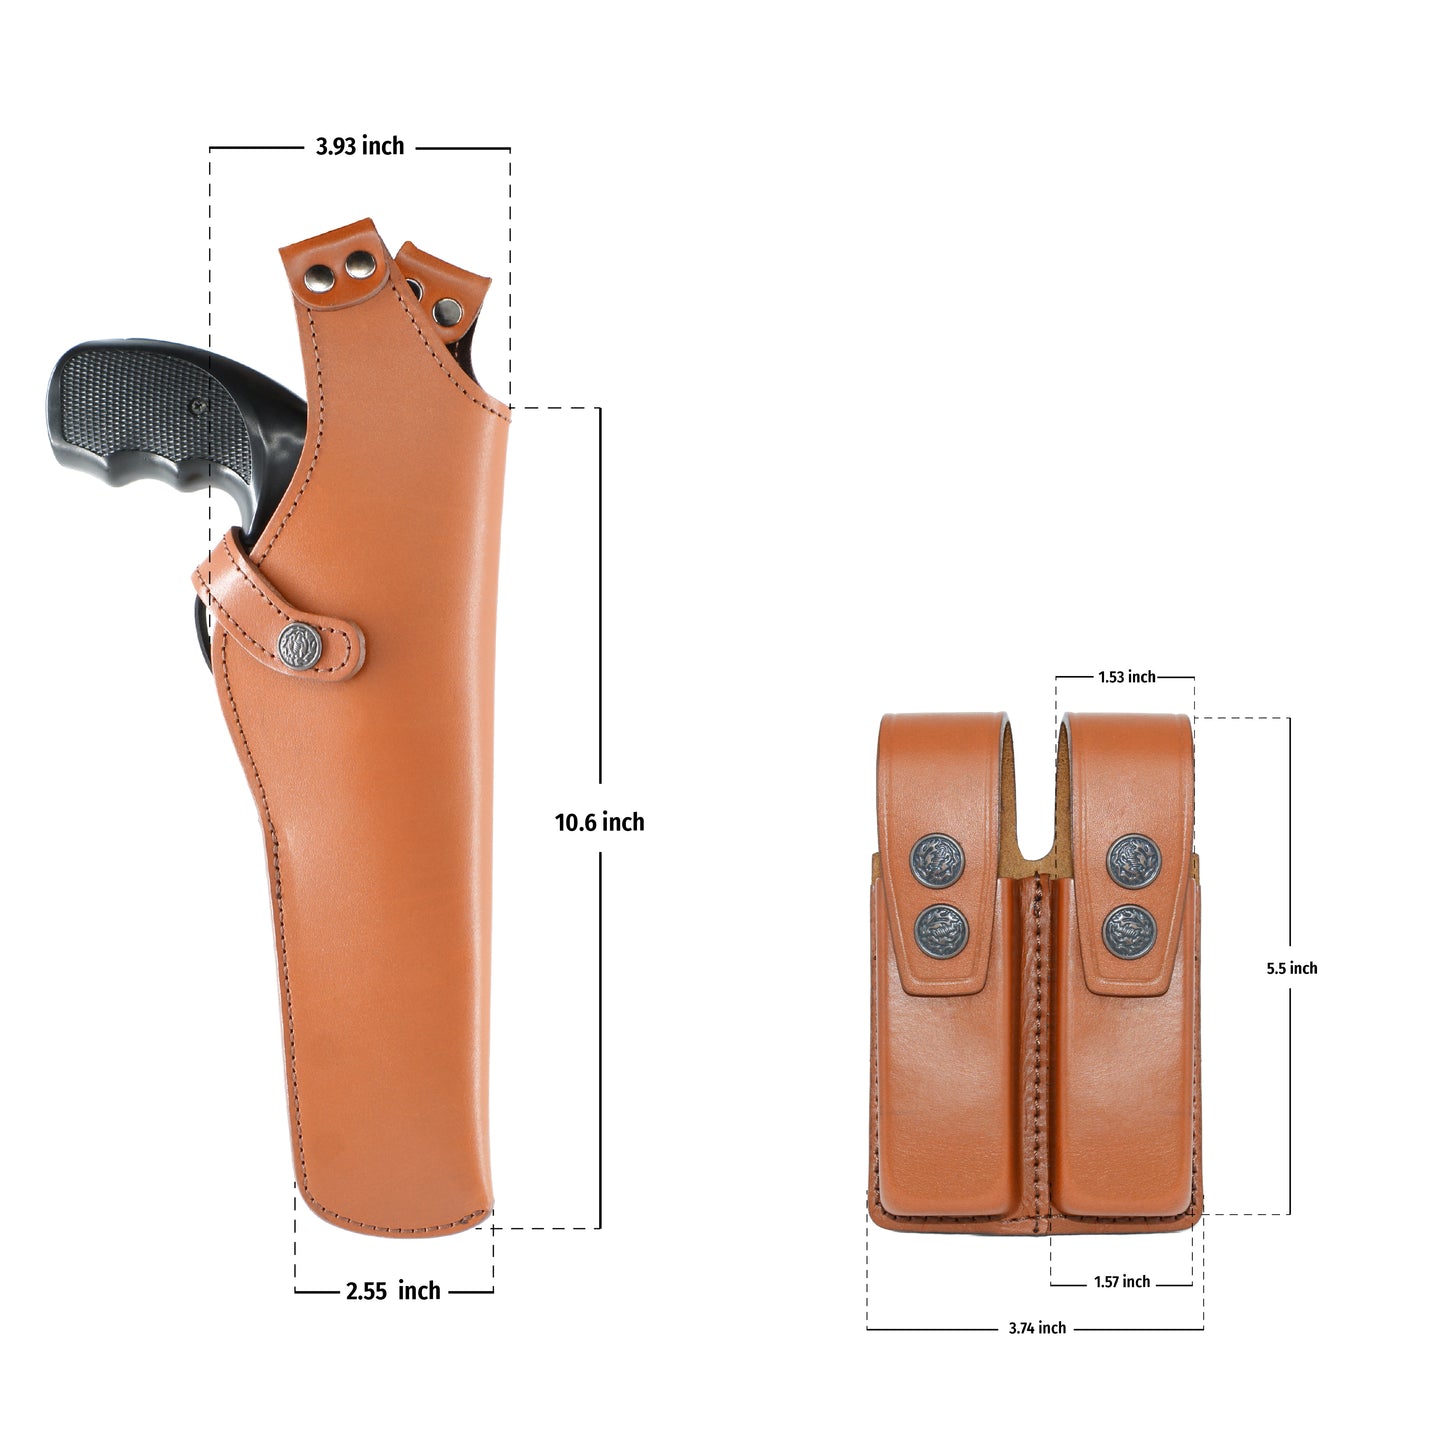 ALIS45303 Leather Vertical Shoulder Holster with Double Magazine Pouch Soft Fabric Interior Lining Colt 1911 up to 5" RH Geunine Leather Handmade